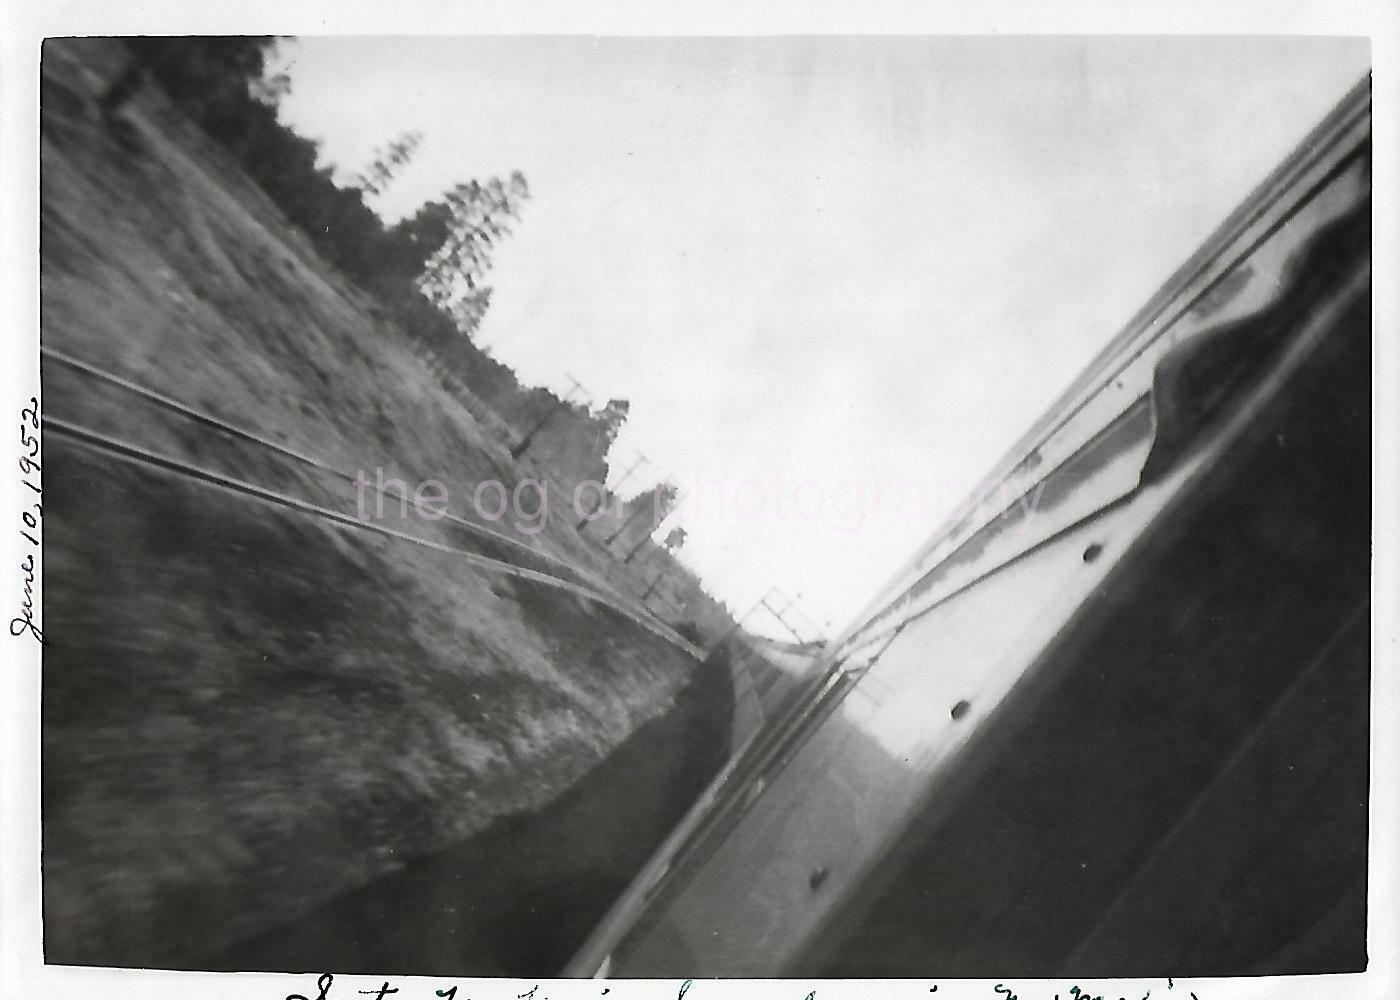 Somewhere In New Mexico SANTA FE TRAIN 5 x 7 FOUND bw PHOTOGRAPH Vintage 11 10 D